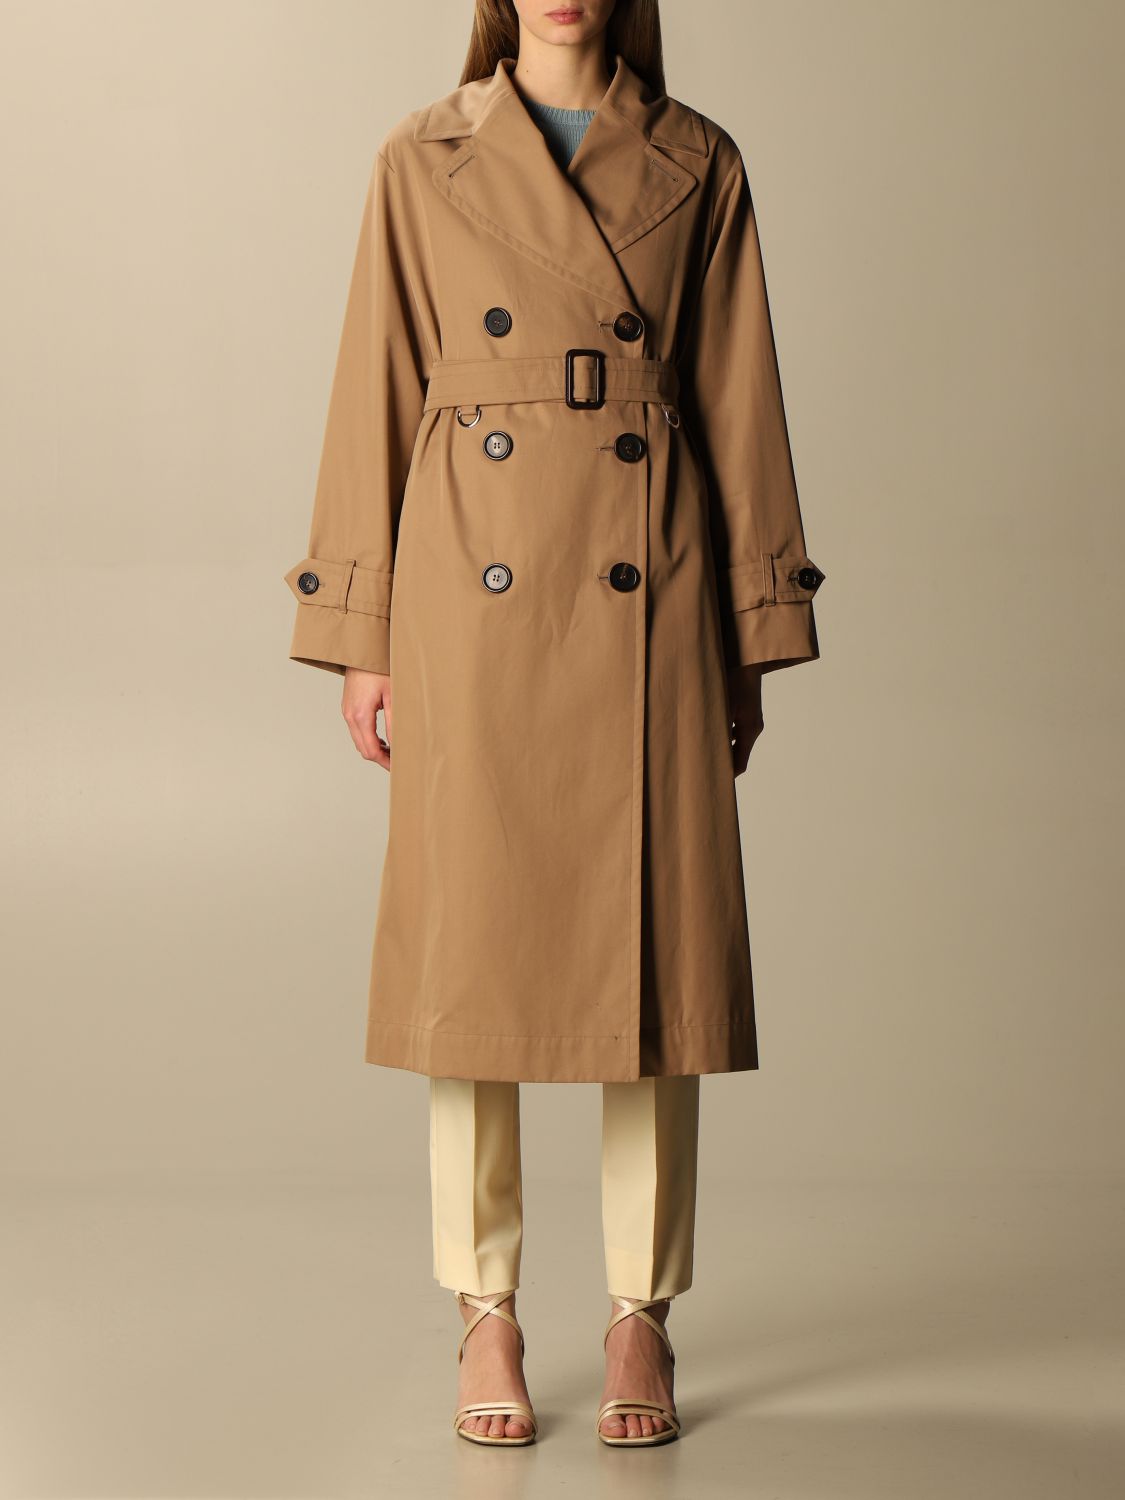 MAX MARA THE CUBE: Dimper double-breasted trench coat - Camel | Max